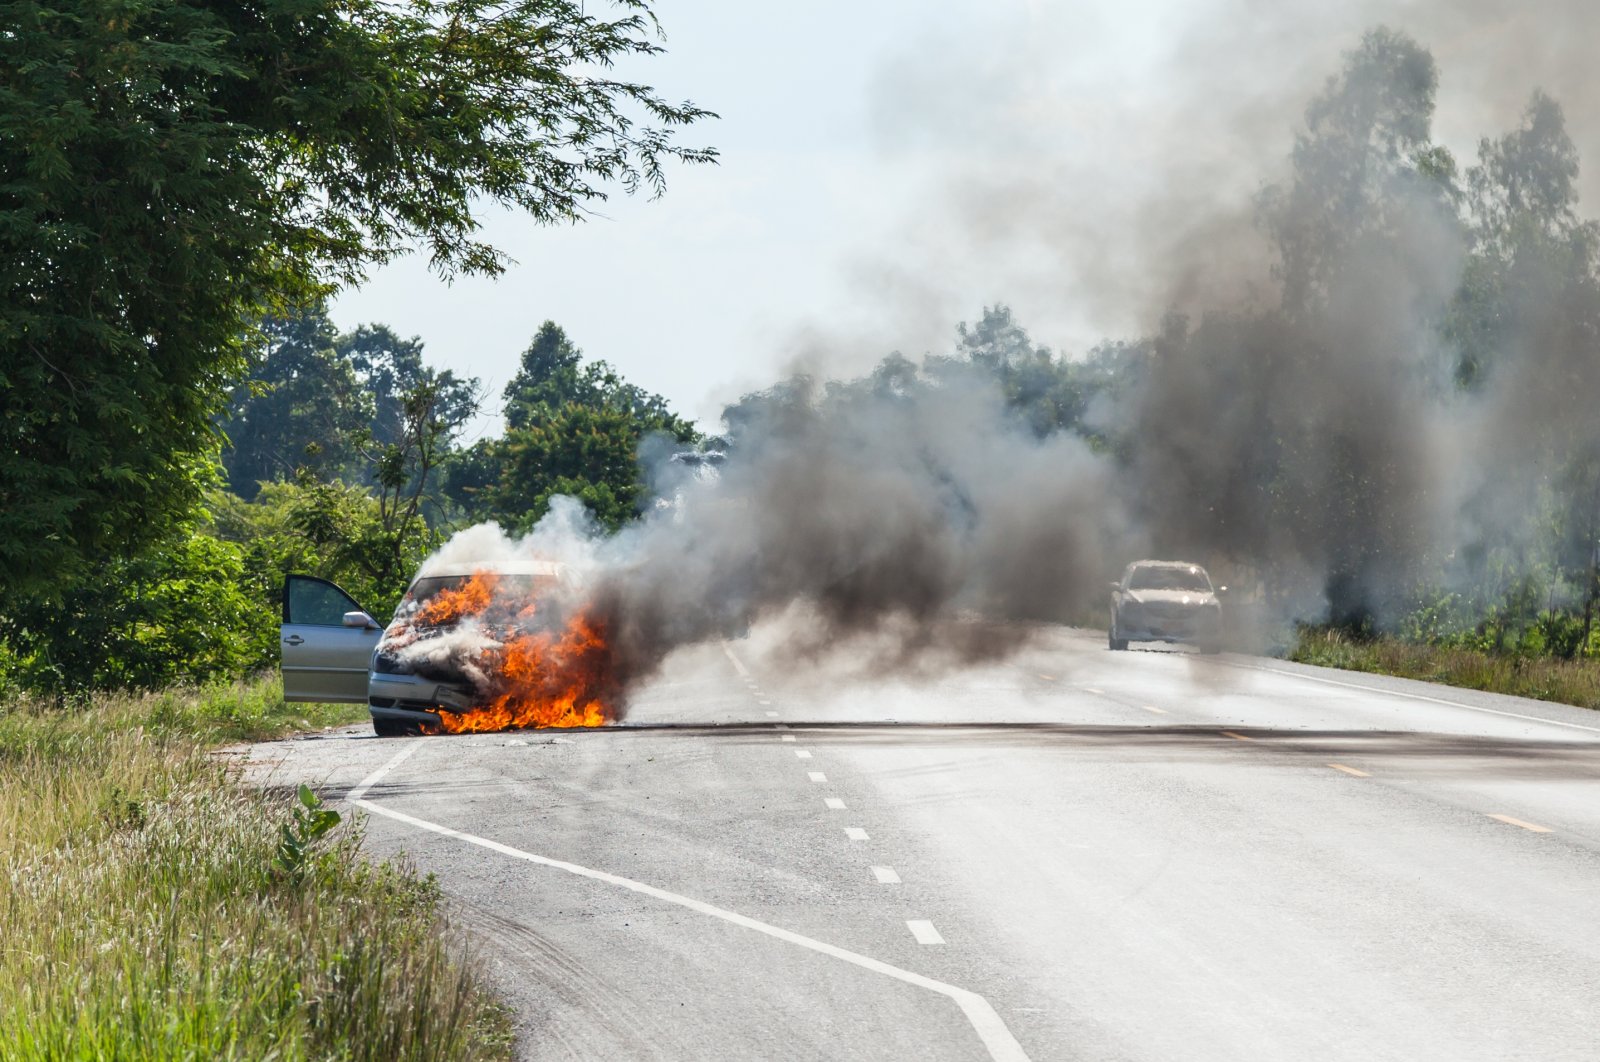 A burning car on a road. (Shutterstock Photo)